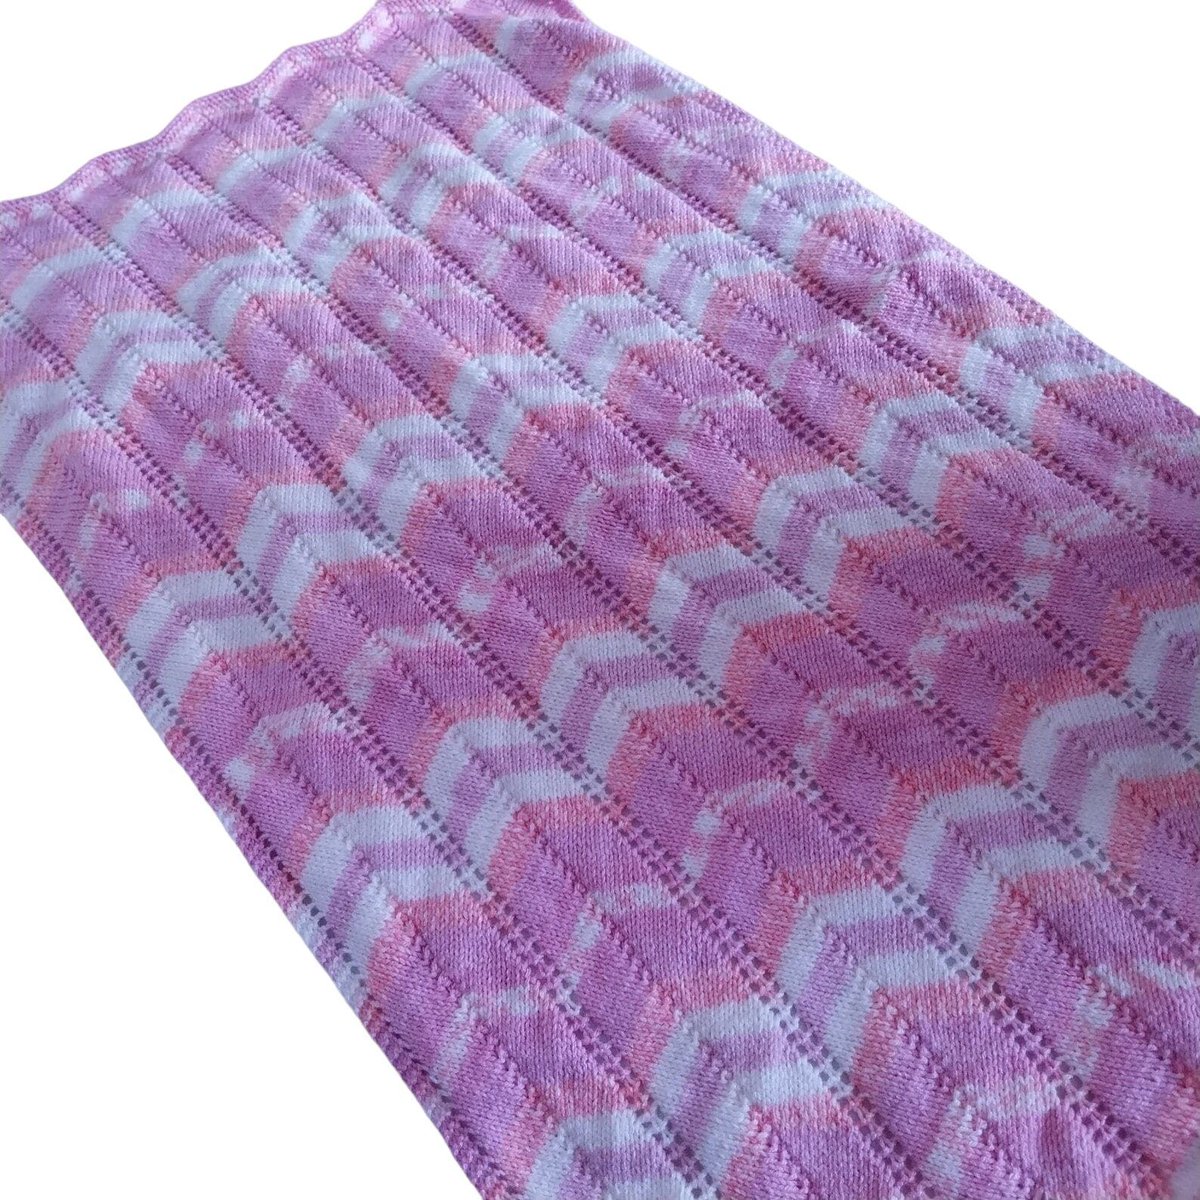 Discover this charming hand-knit baby pram blanket, styled in a pink and white chevron pattern. Ideal for snug stroller rides! Visit my #Etsy shop here: knittingtopia.etsy.com/listing/167119… #babyessentials #handcrafted #knittingtopia #craftbizparty #MHHSBD